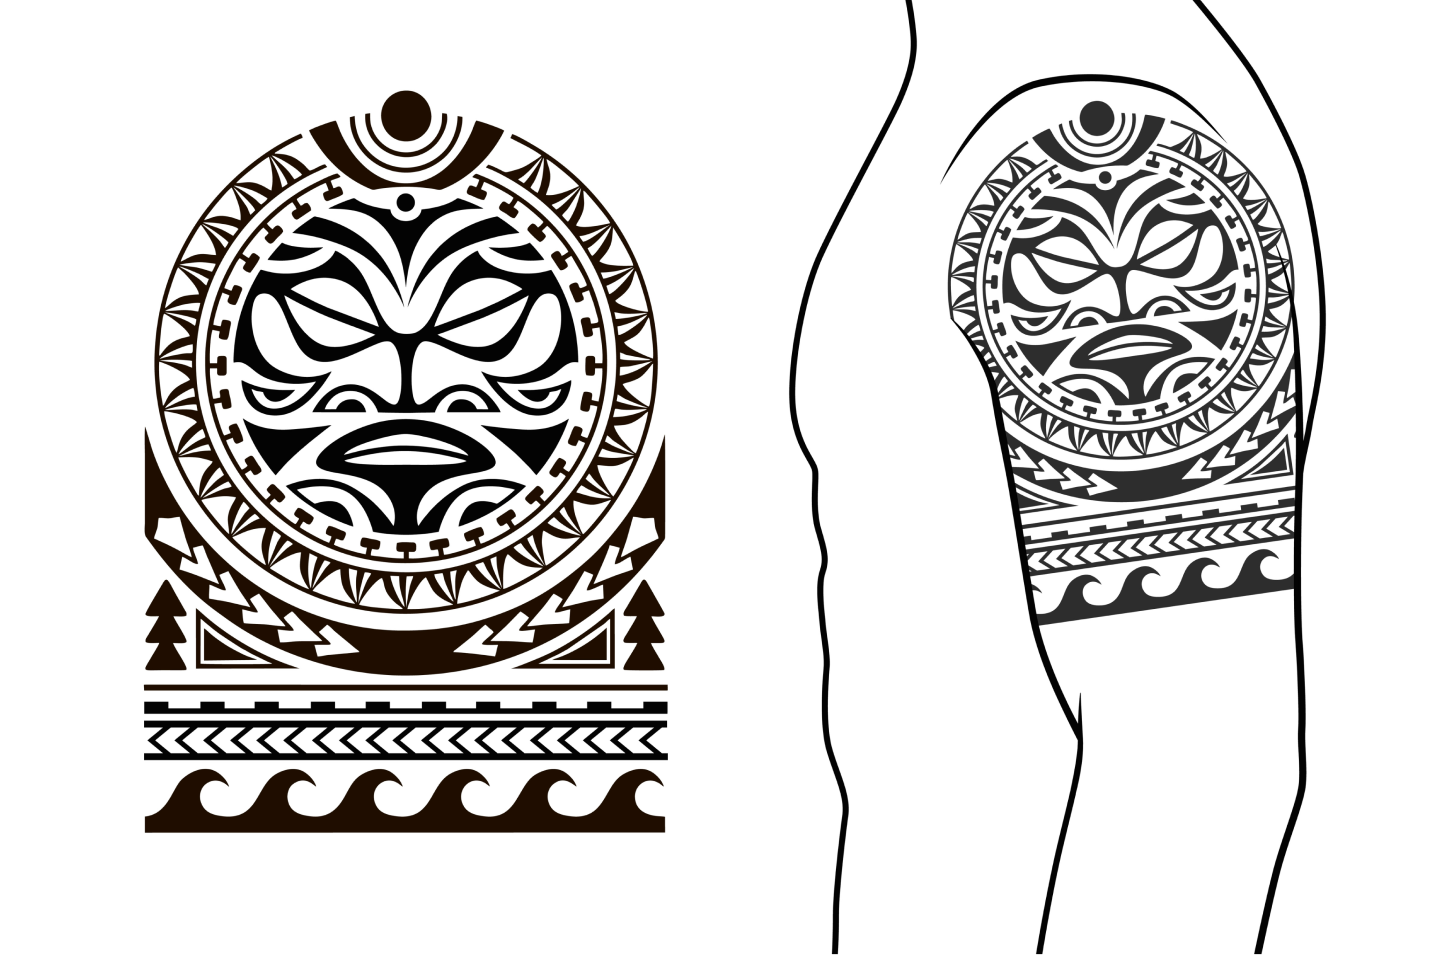 Ink It Up with Tribal Tattoo Designs at Tattooism at best price in Mumbai